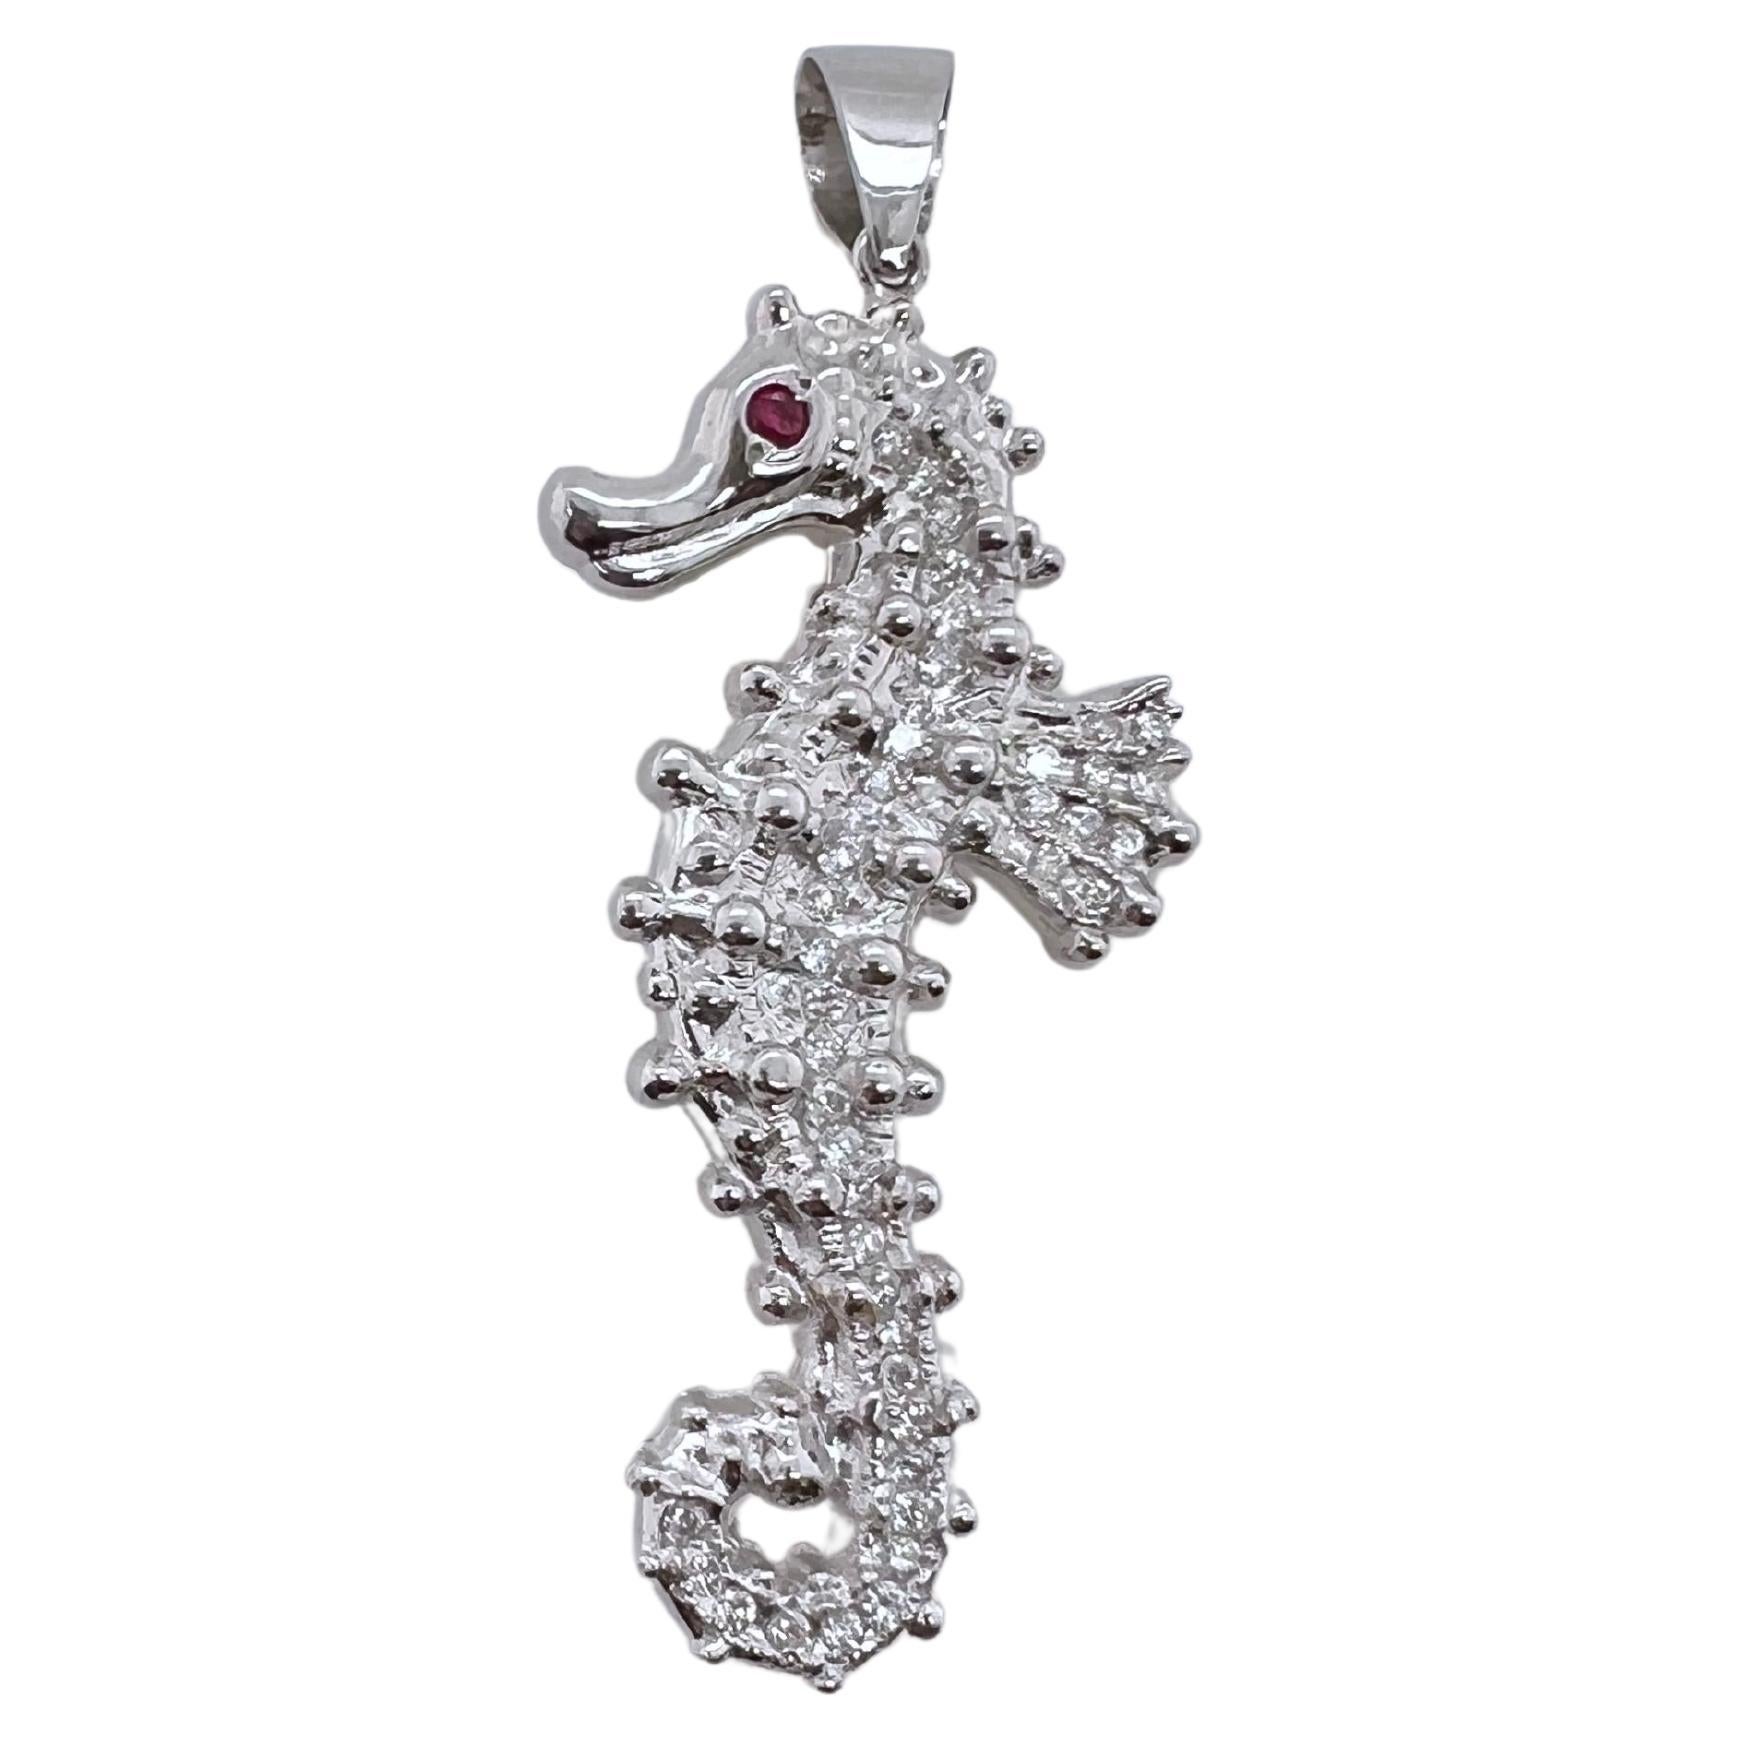 14k White Gold Diamond Small Seahorse Pendant / Brooch with Ruby